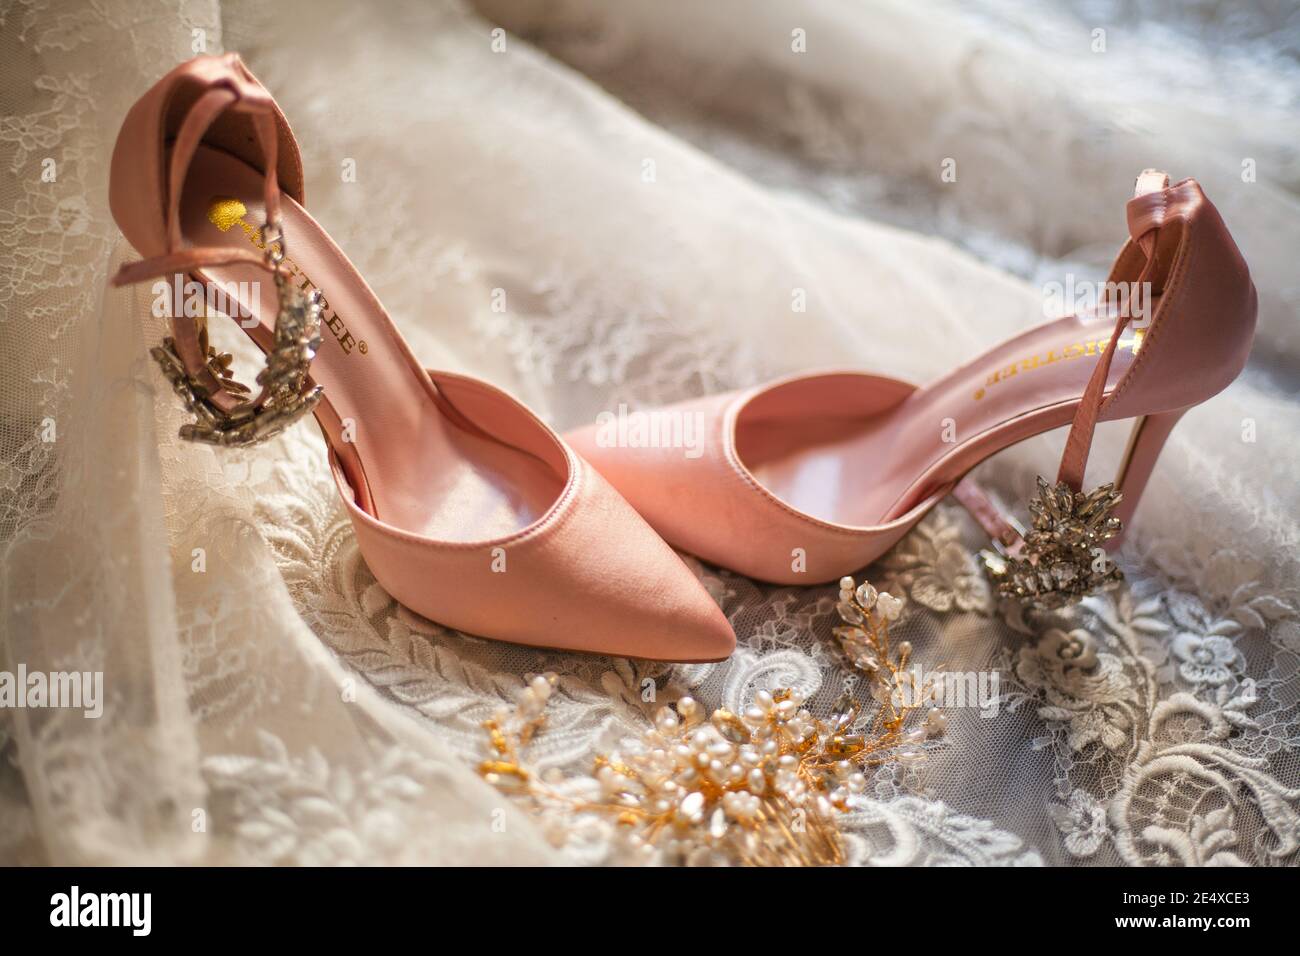 KITCHENER, CANADA - Aug 08, 2019: Beautiful Soft pink heels laying on top  of a white wedding dress, with bride and groom rings Stock Photo - Alamy